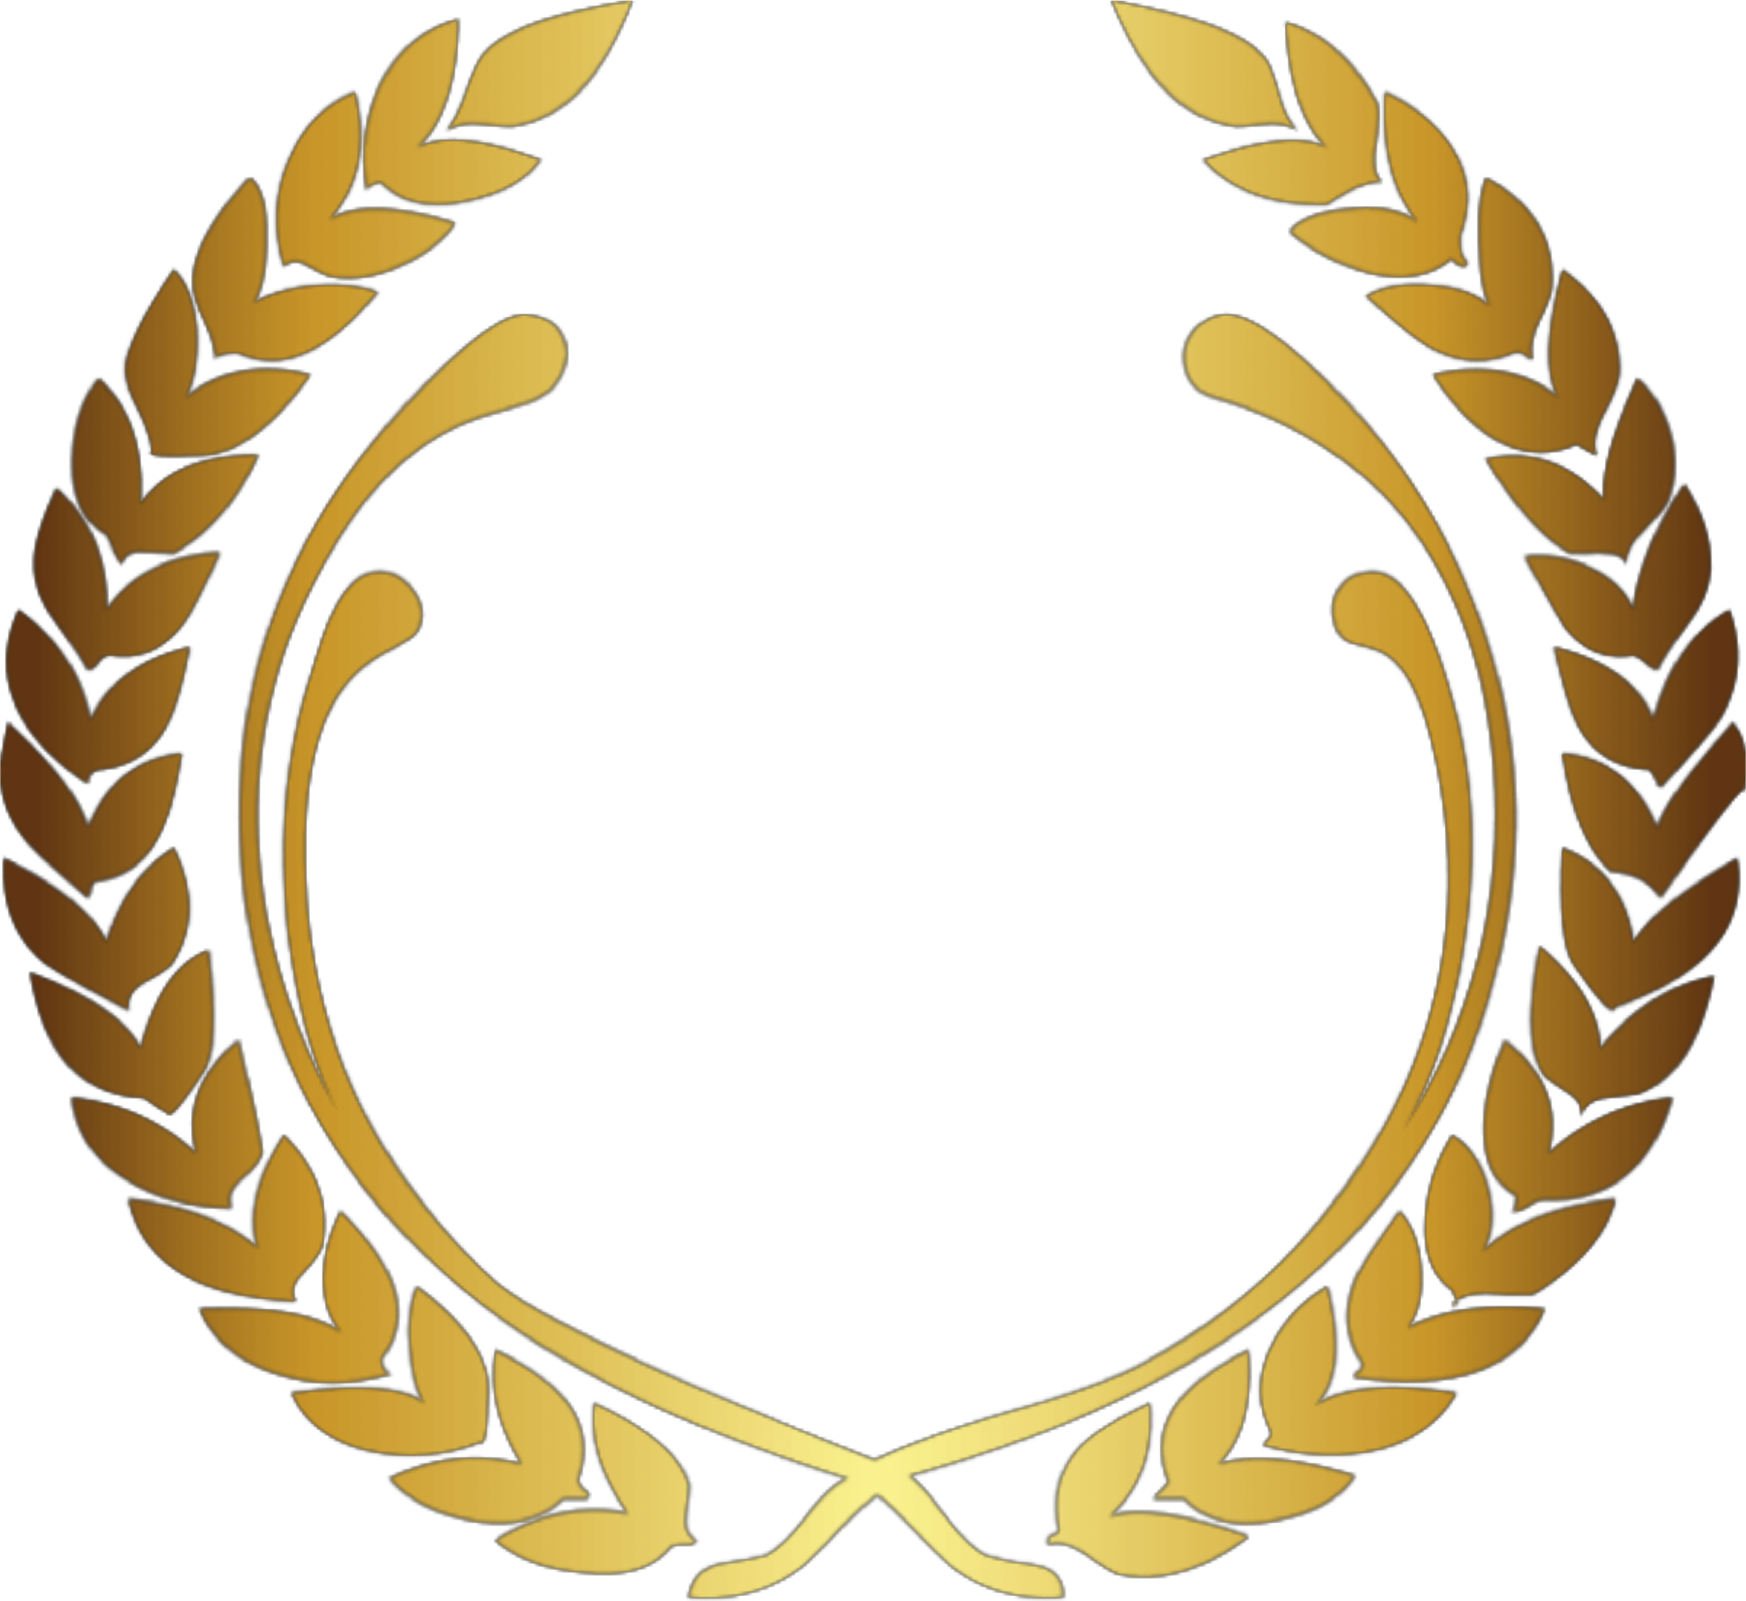 Venice Shorts Film Festival LOVED The Movie Nominee W